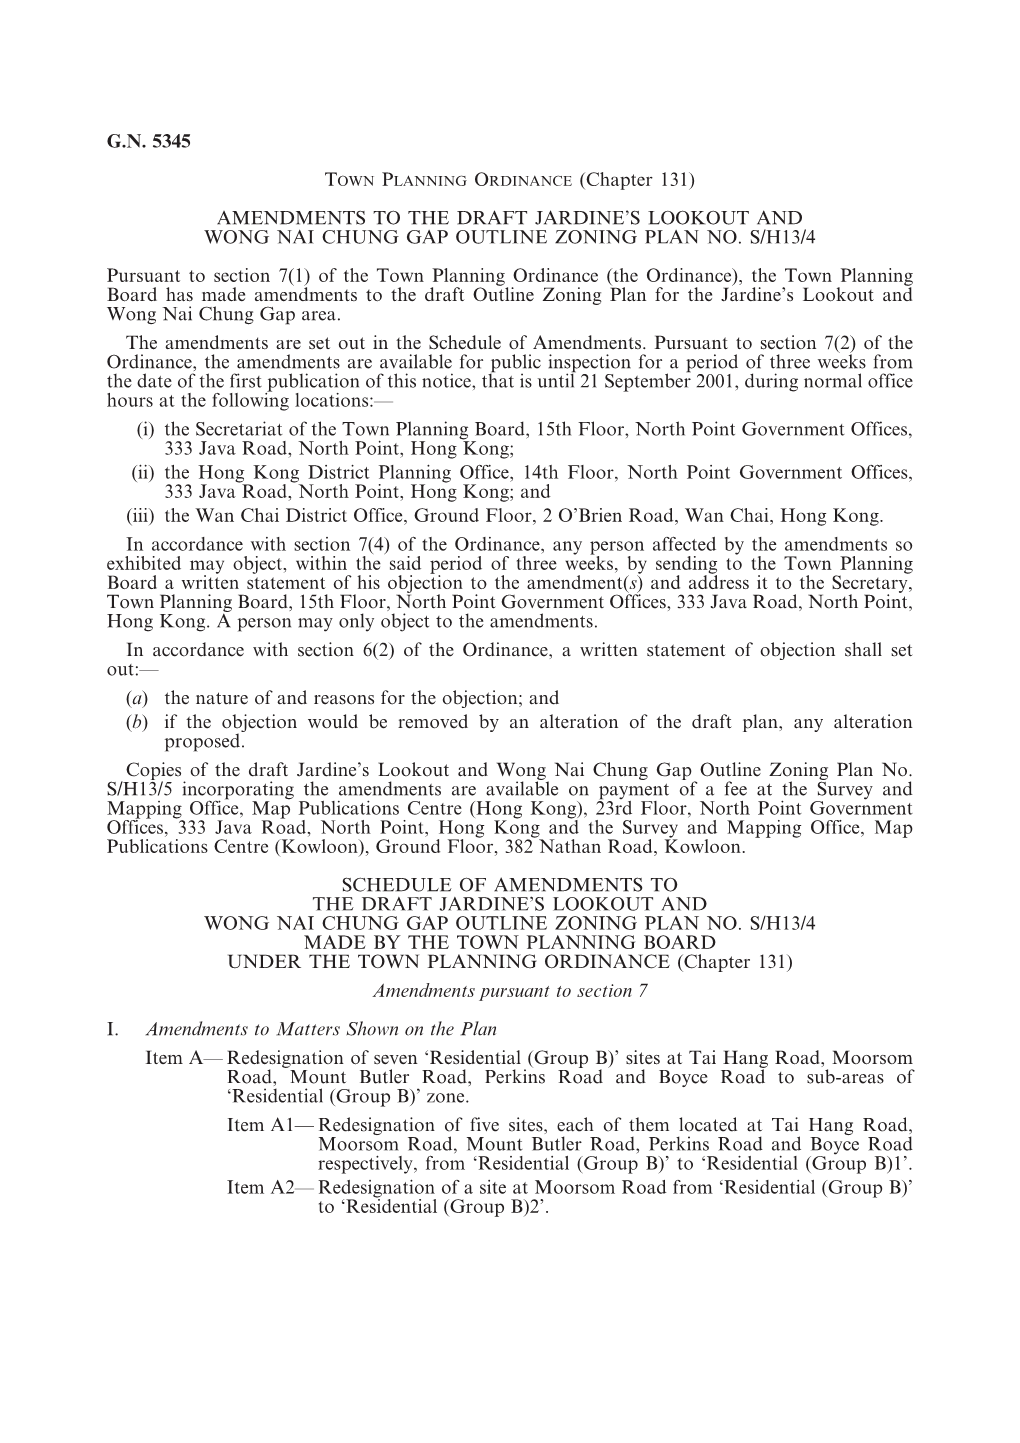 G.N. 5345 TOWN PLANNING ORDINANCE (Chapter 131) AMENDMENTS to the DRAFT JARDINE's LOOKOUT and WONG NAI CHUNG GAP OUTLINE ZONIN